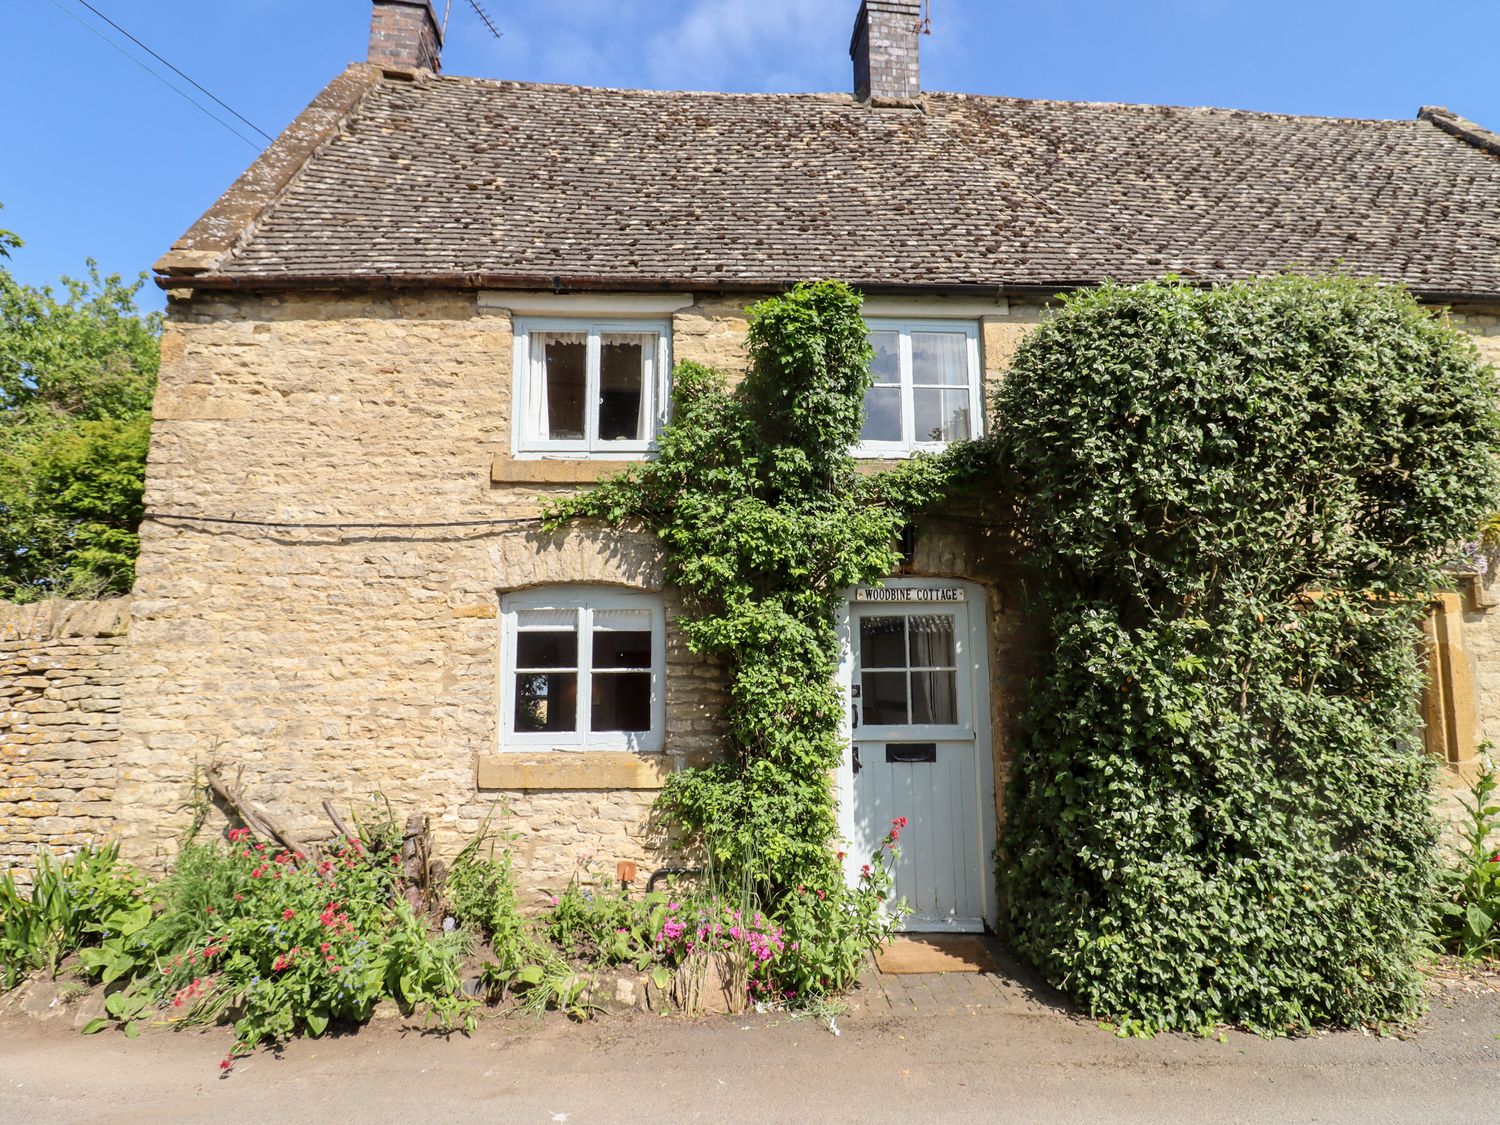 Woodbine Cottage - Cotswolds - 1125930 - photo 1